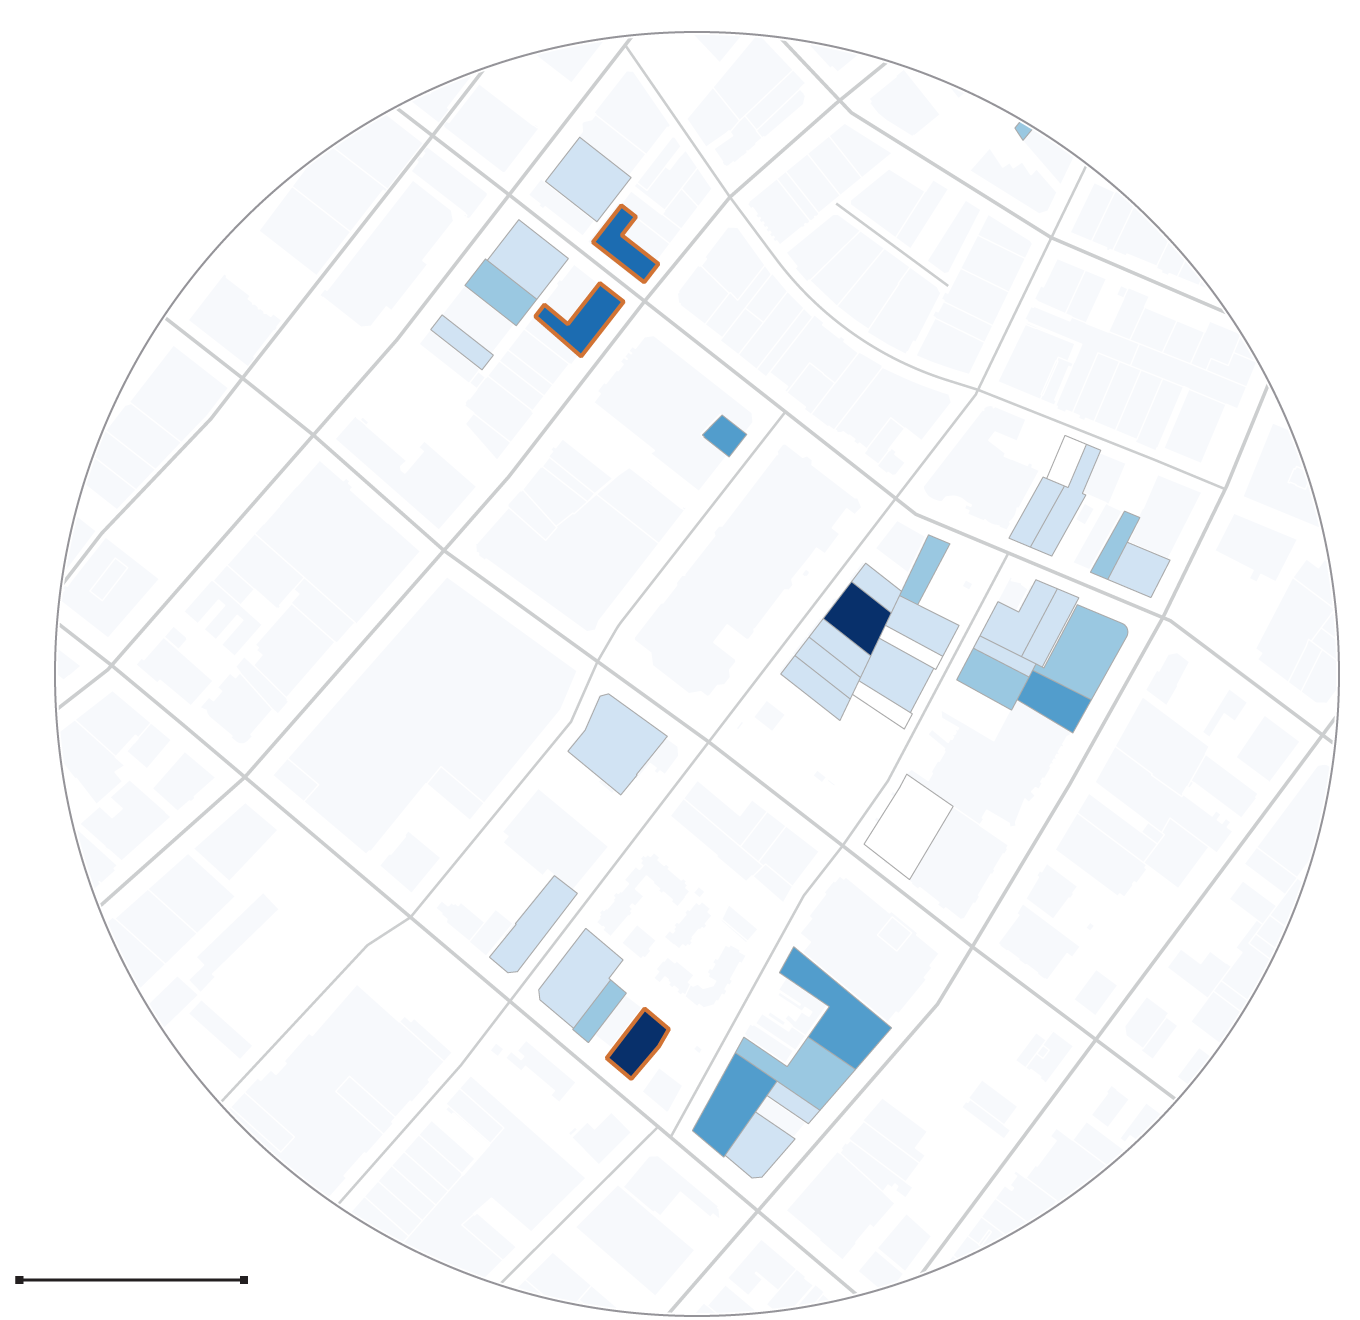 A map of homeless housing providers in Skid Row that shows the number of housing code and public health complaints per building. The Courtland and the Madison have the highest number in the graphic, at over 41 complaints each, followed by the King Edward and the Baltimore at between 31-40 complaints each.